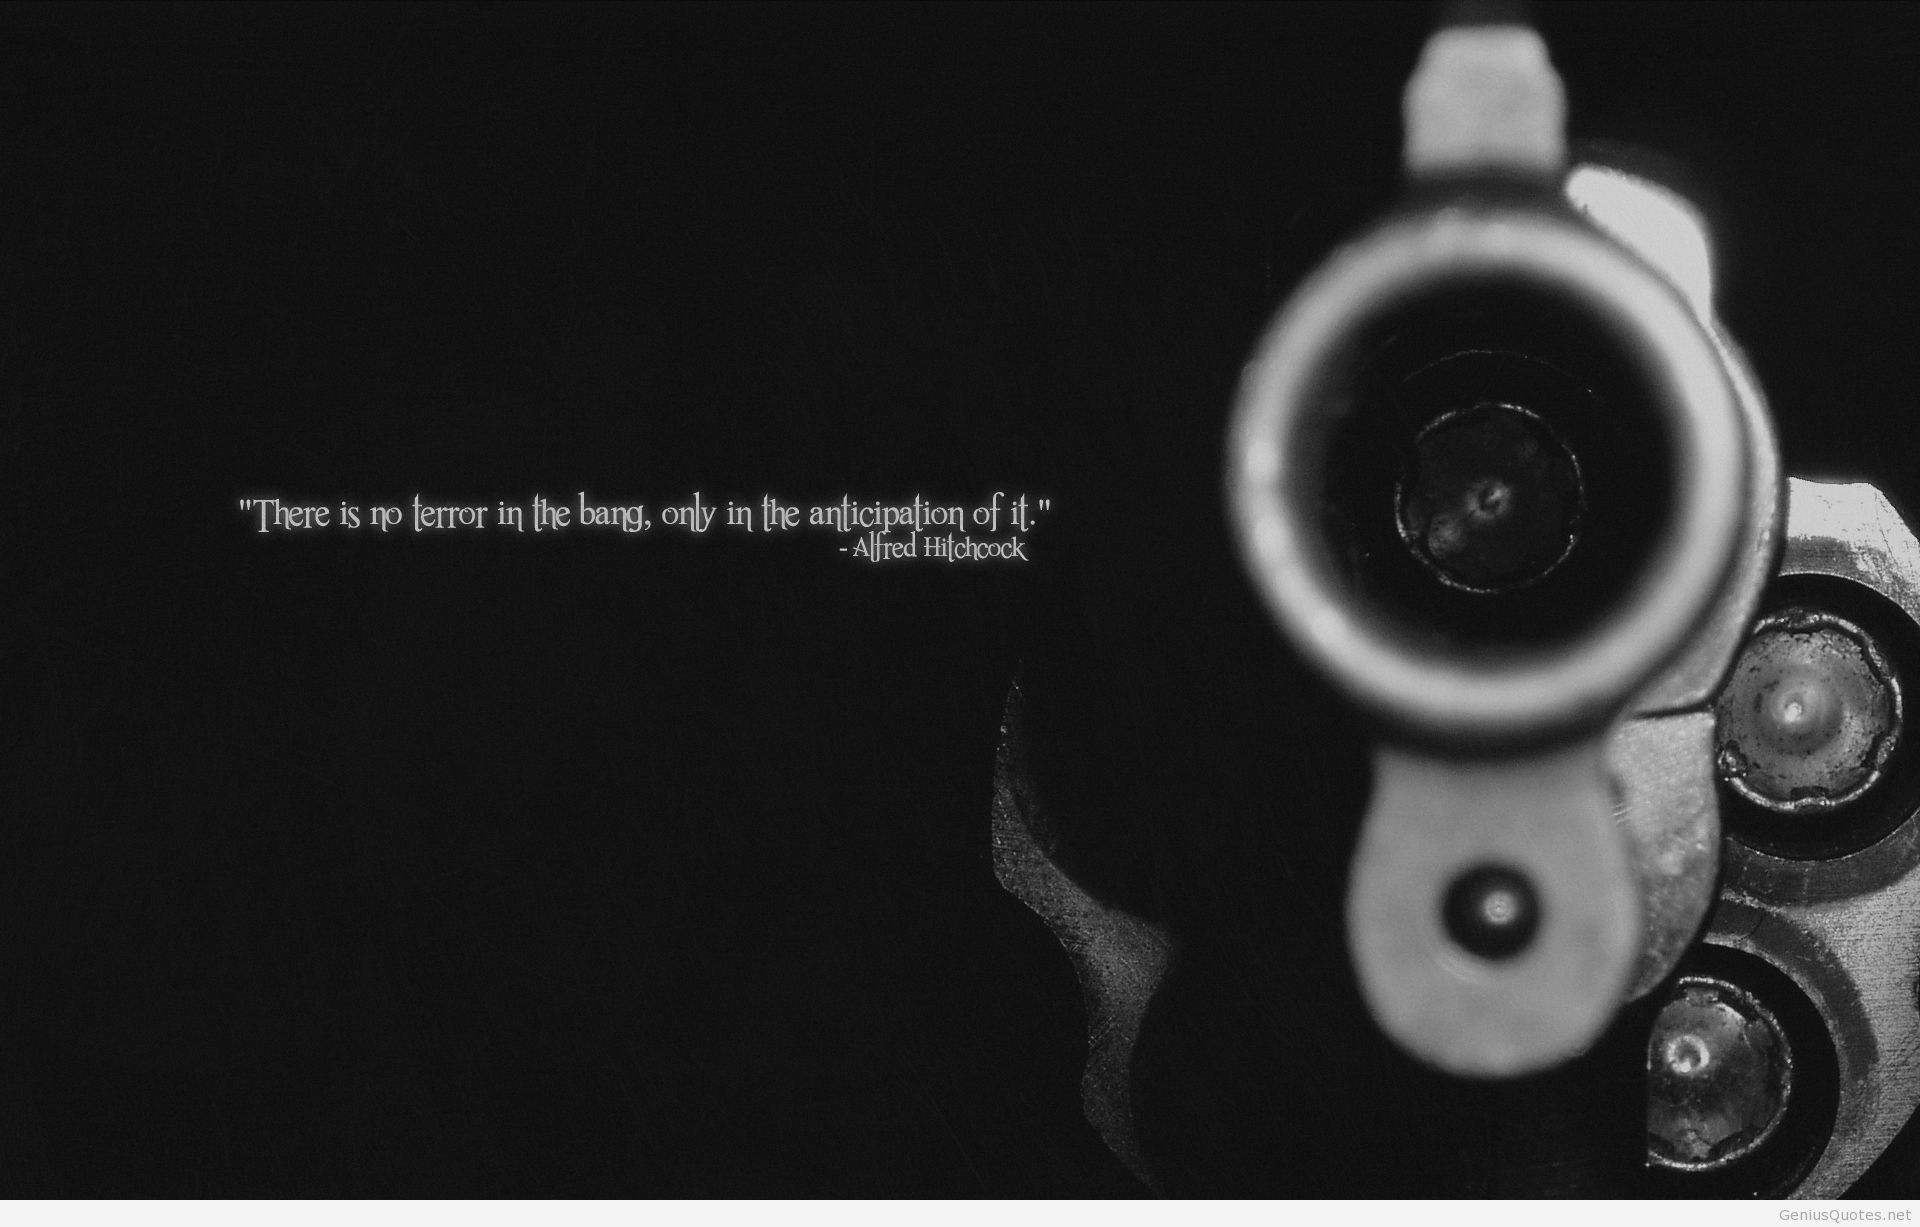 There Is No Terror In The Bang Quote - Italian Mafia Background - 1920x1227  Wallpaper 